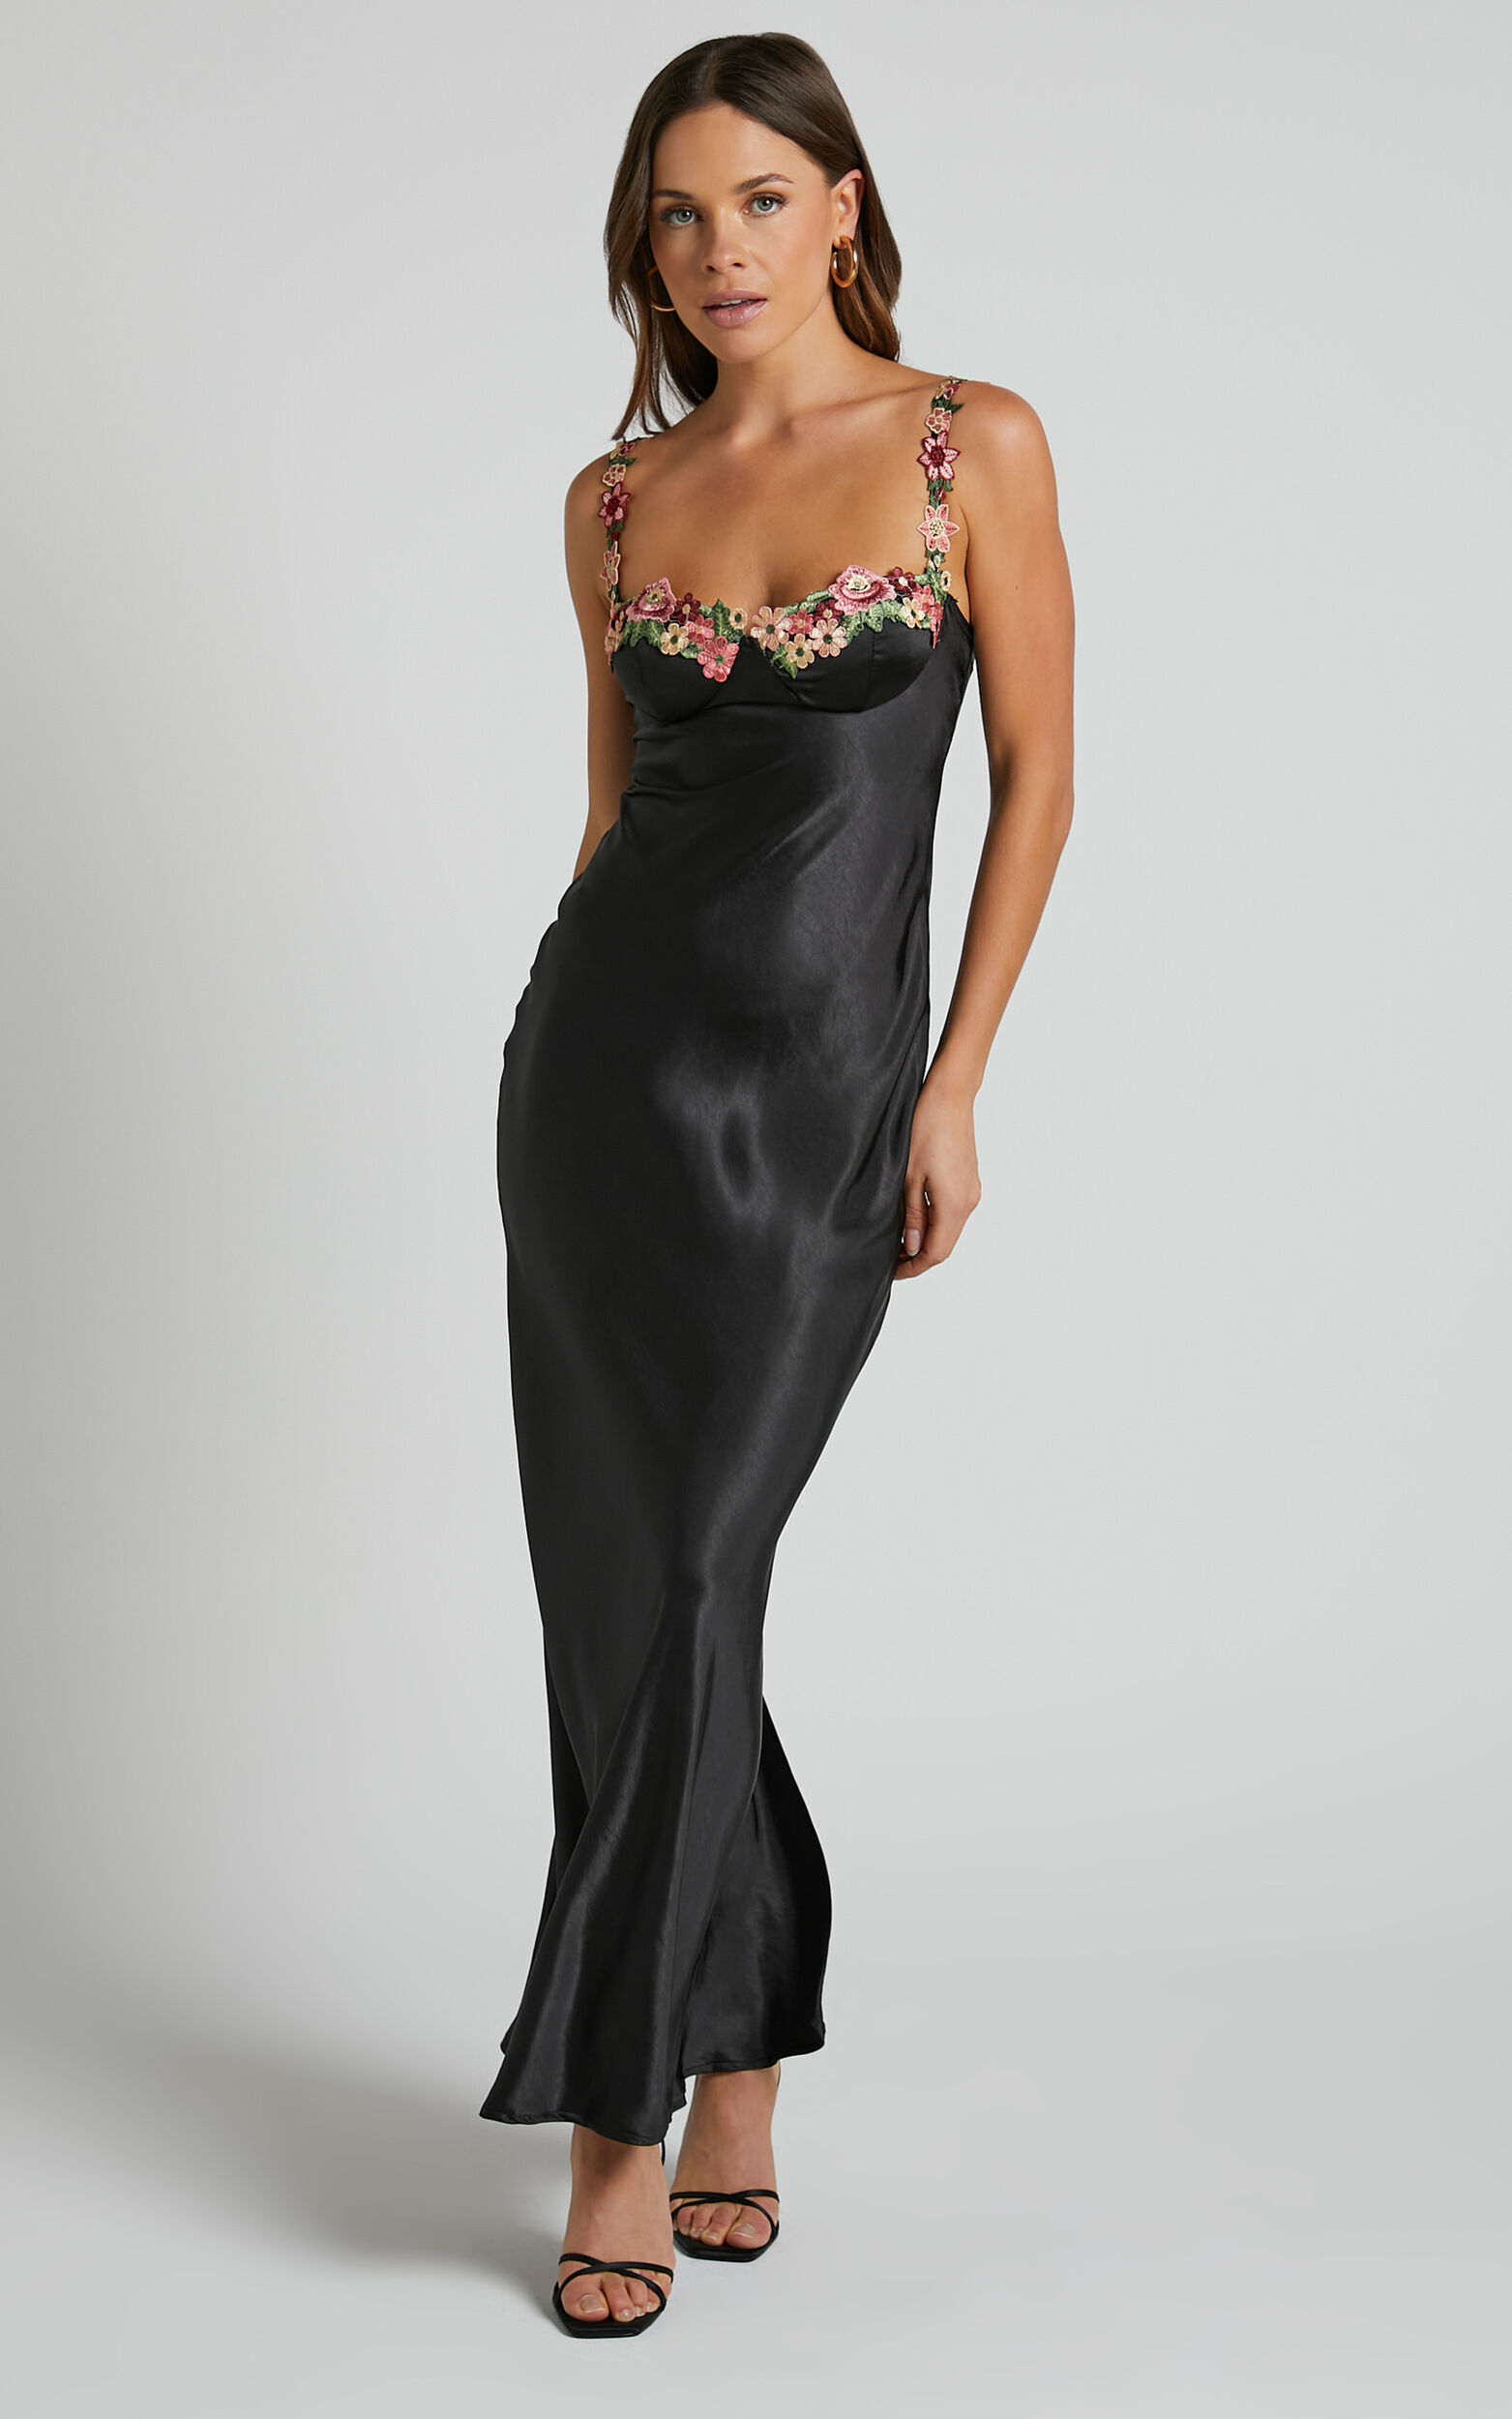 Floral Choker Satin Cami Maxi Dress in Black - Retro, Indie and